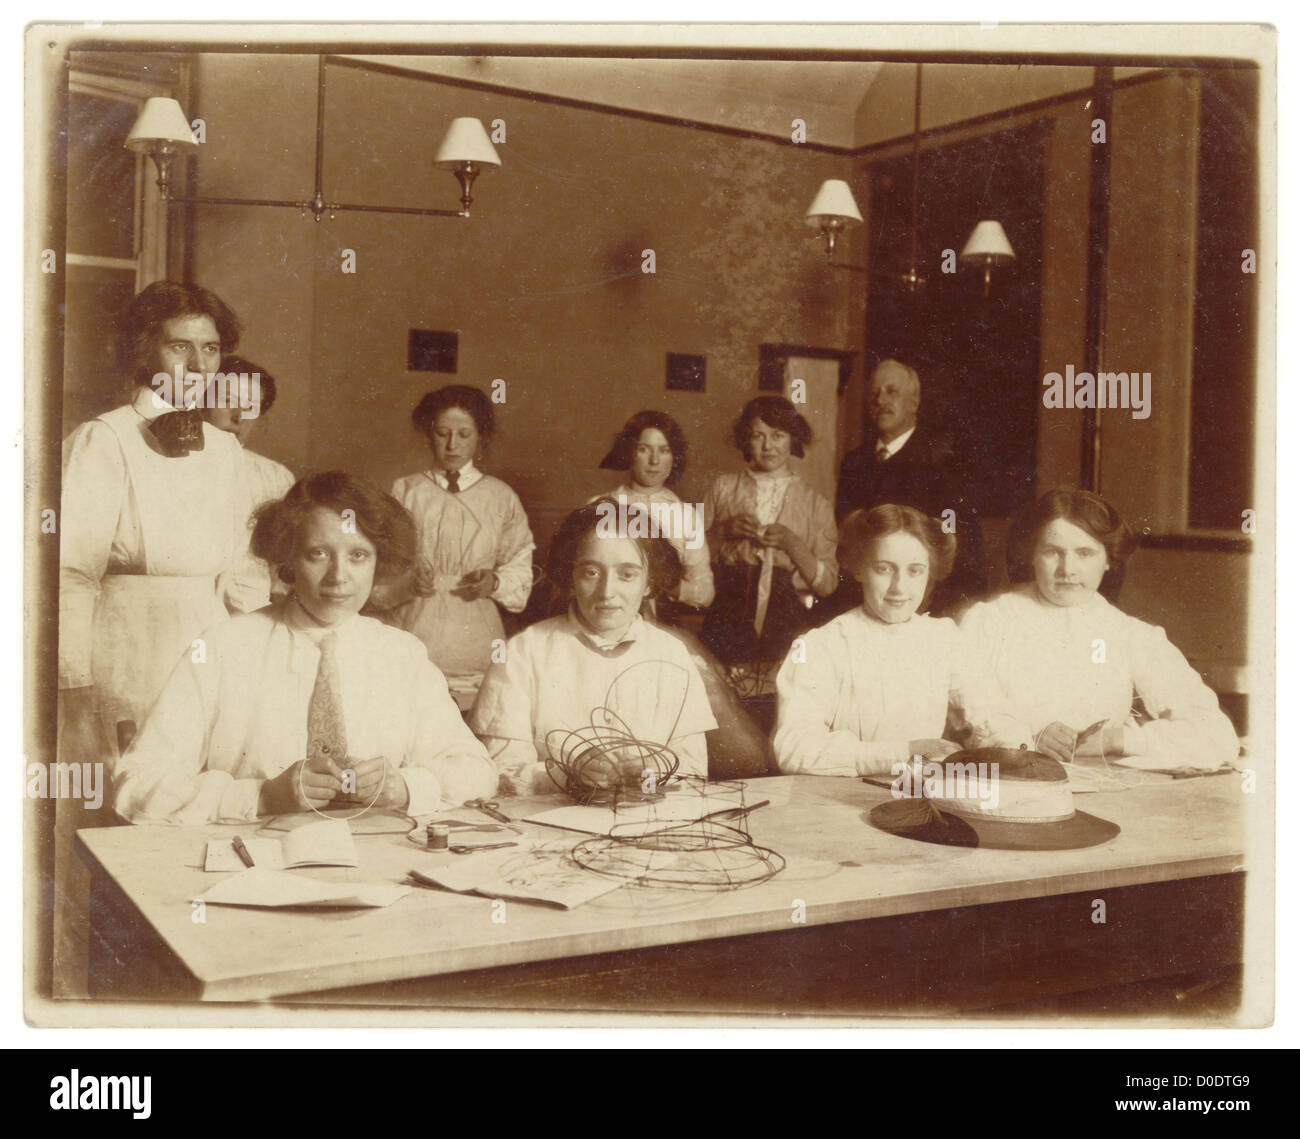 Original WW1 era photograph of young women at a Technical school millinery class, craft crafts crafting, making, designing hats, dated 1915, U.K. Stock Photo